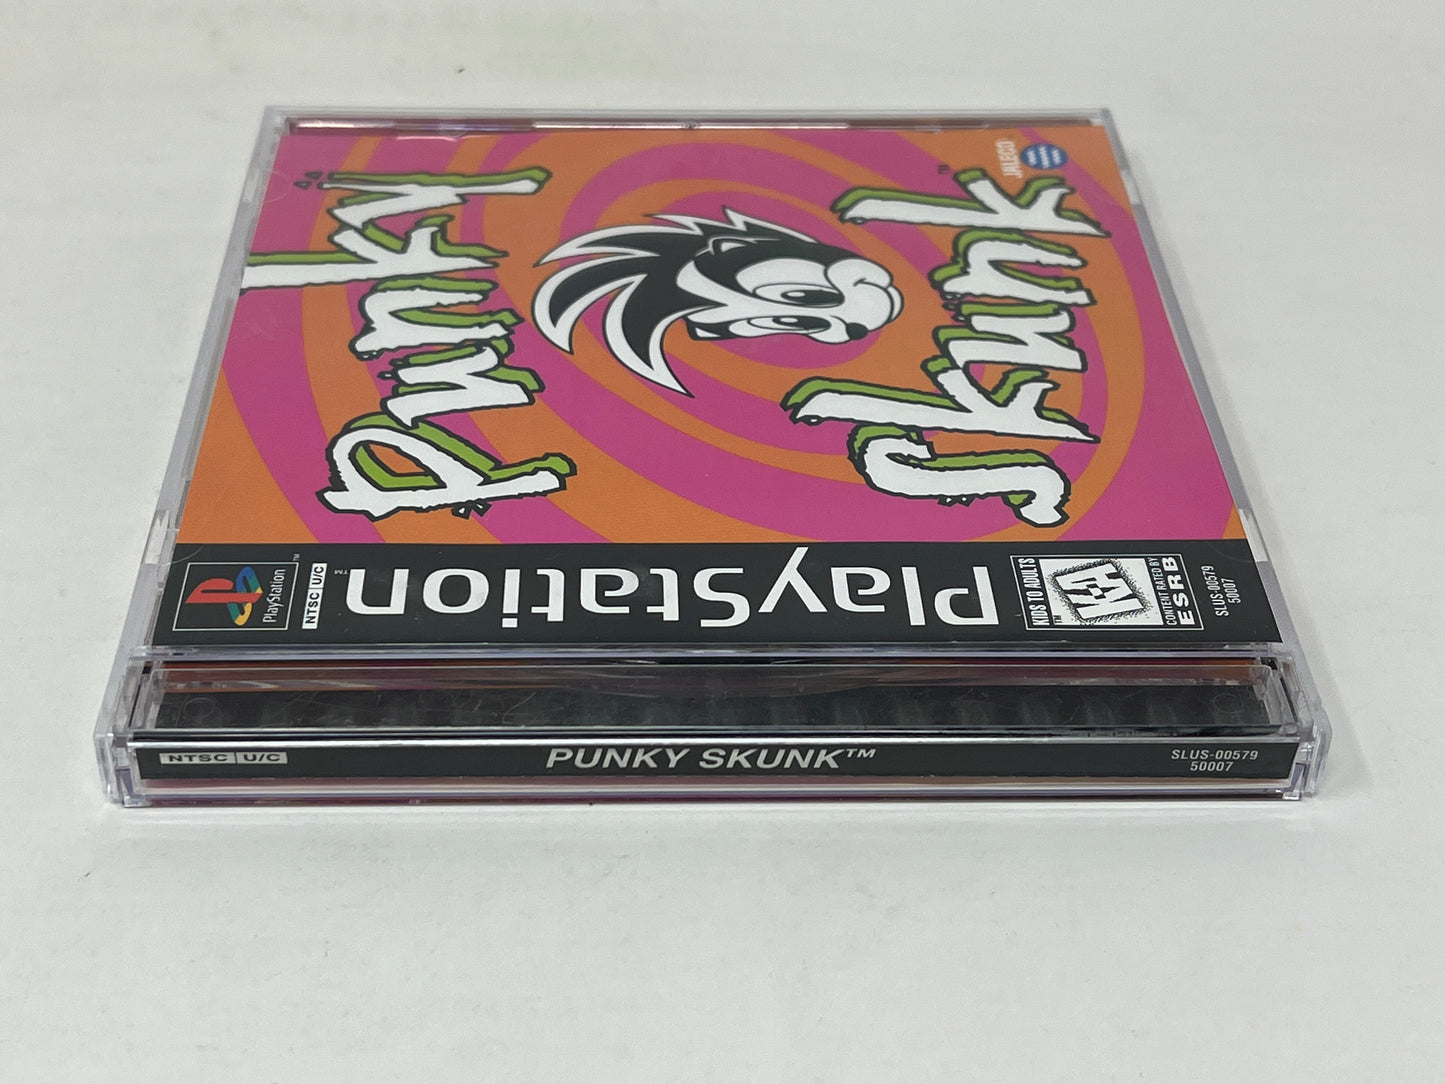 Sony PlayStation - Punky Skunk - Complete